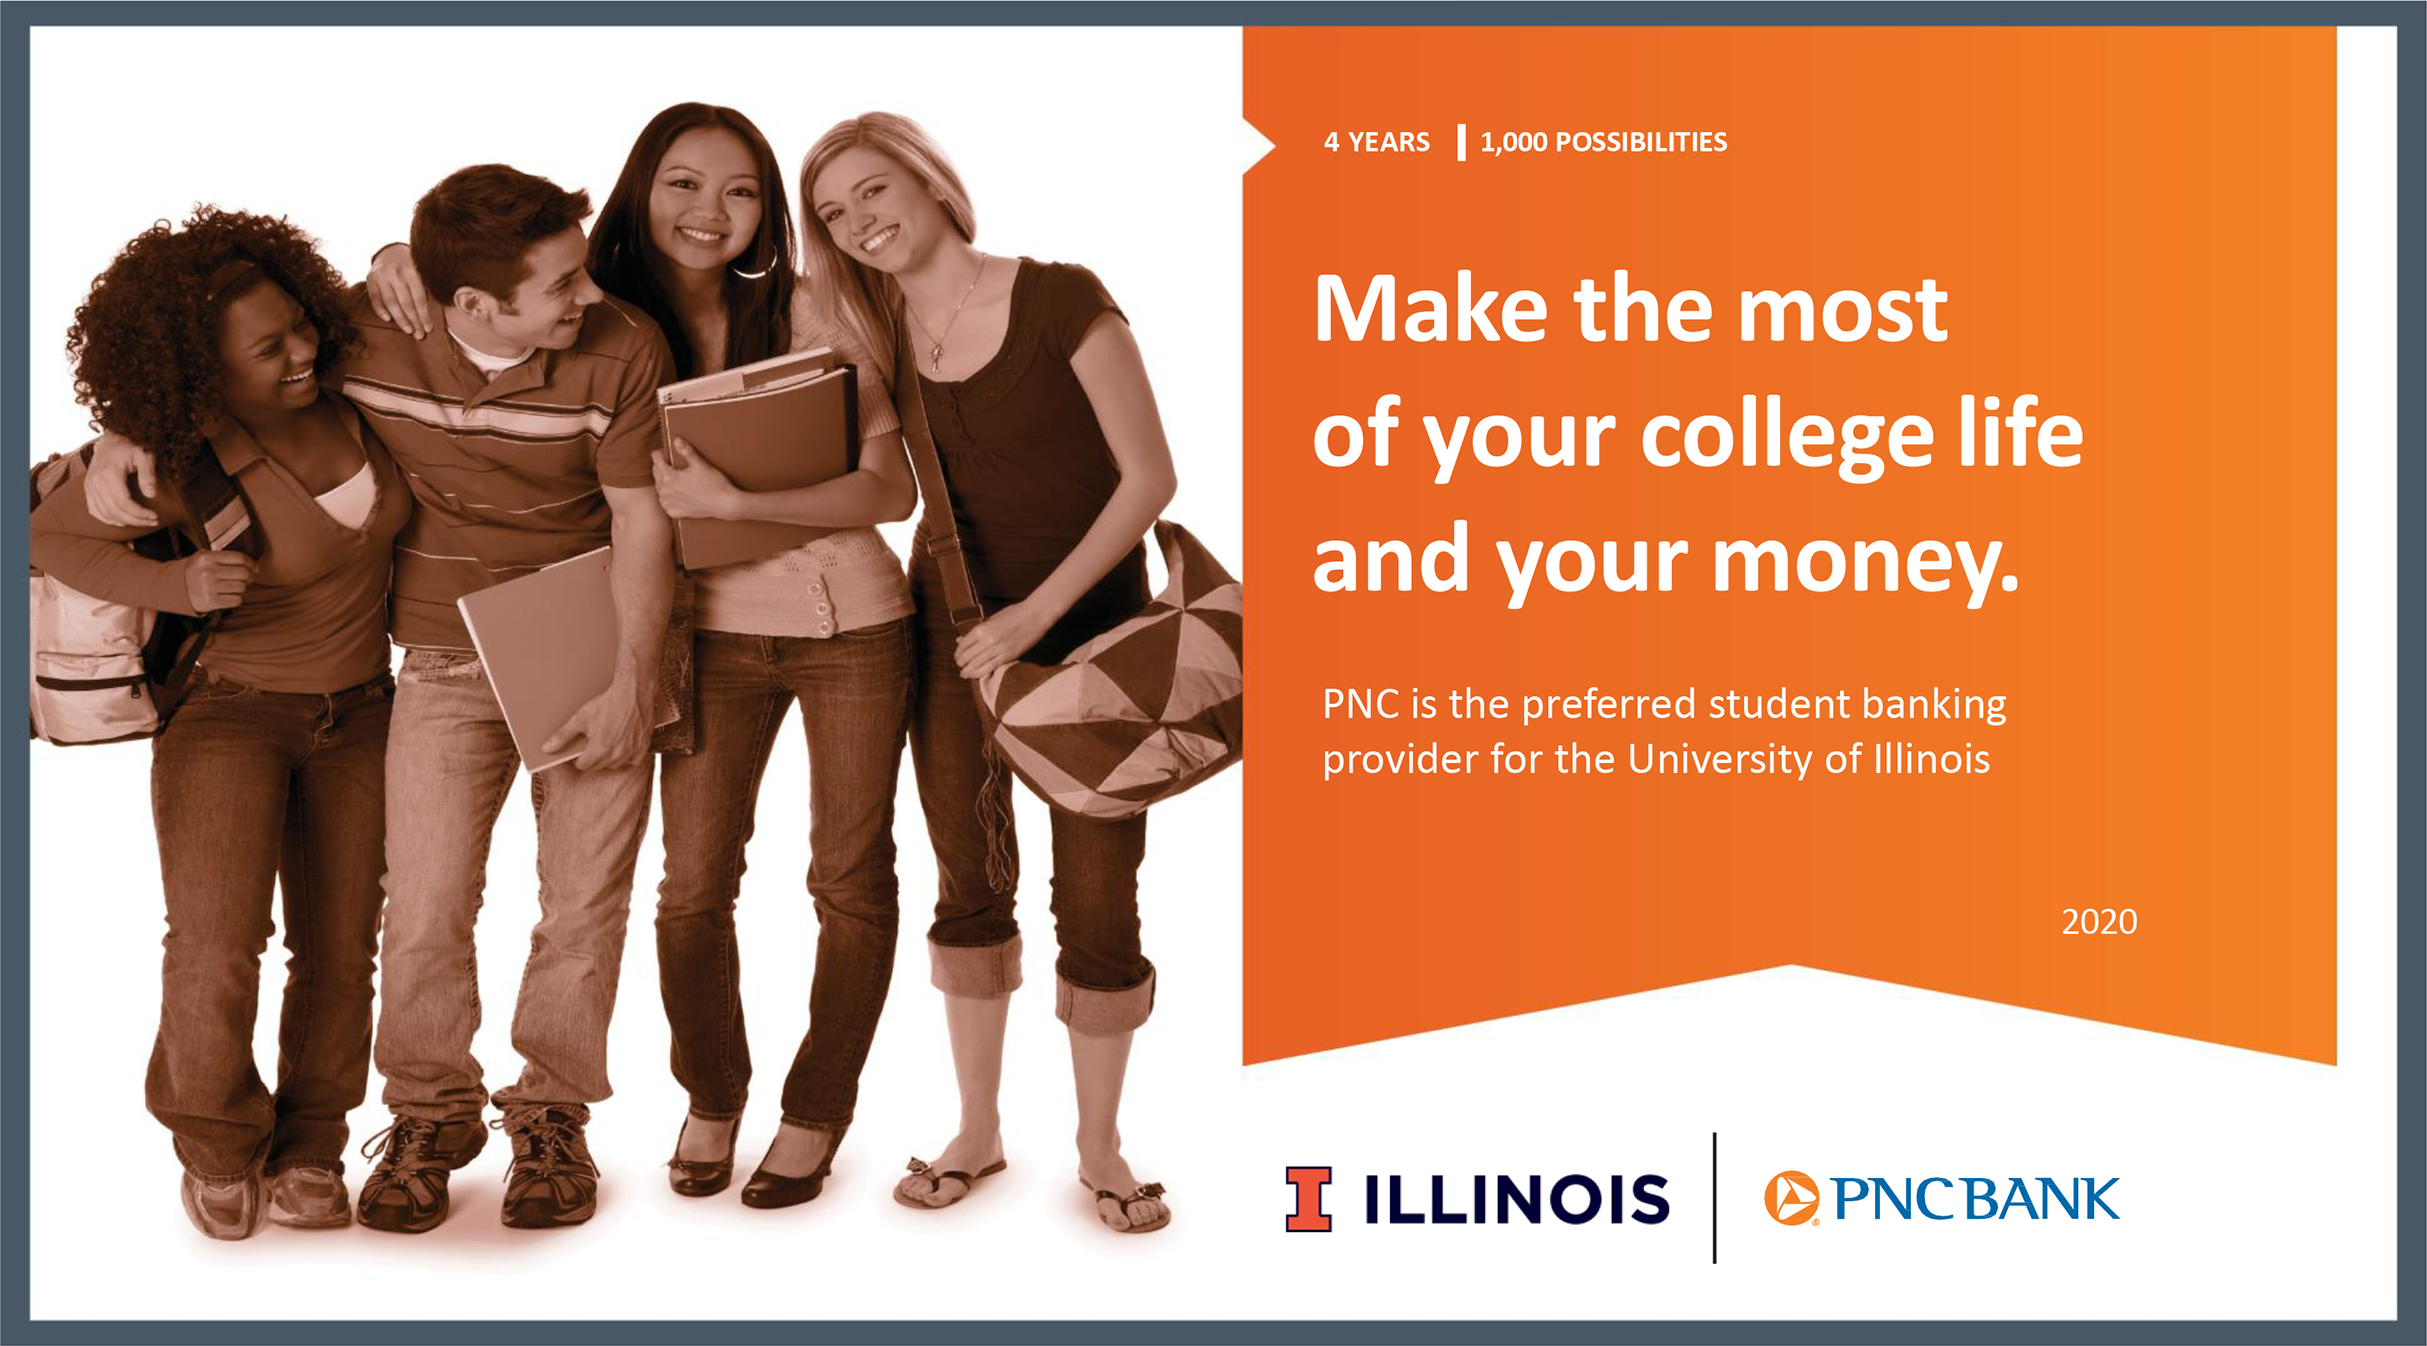 PNC is the preferred student banking provider for the University of Illinois graphic